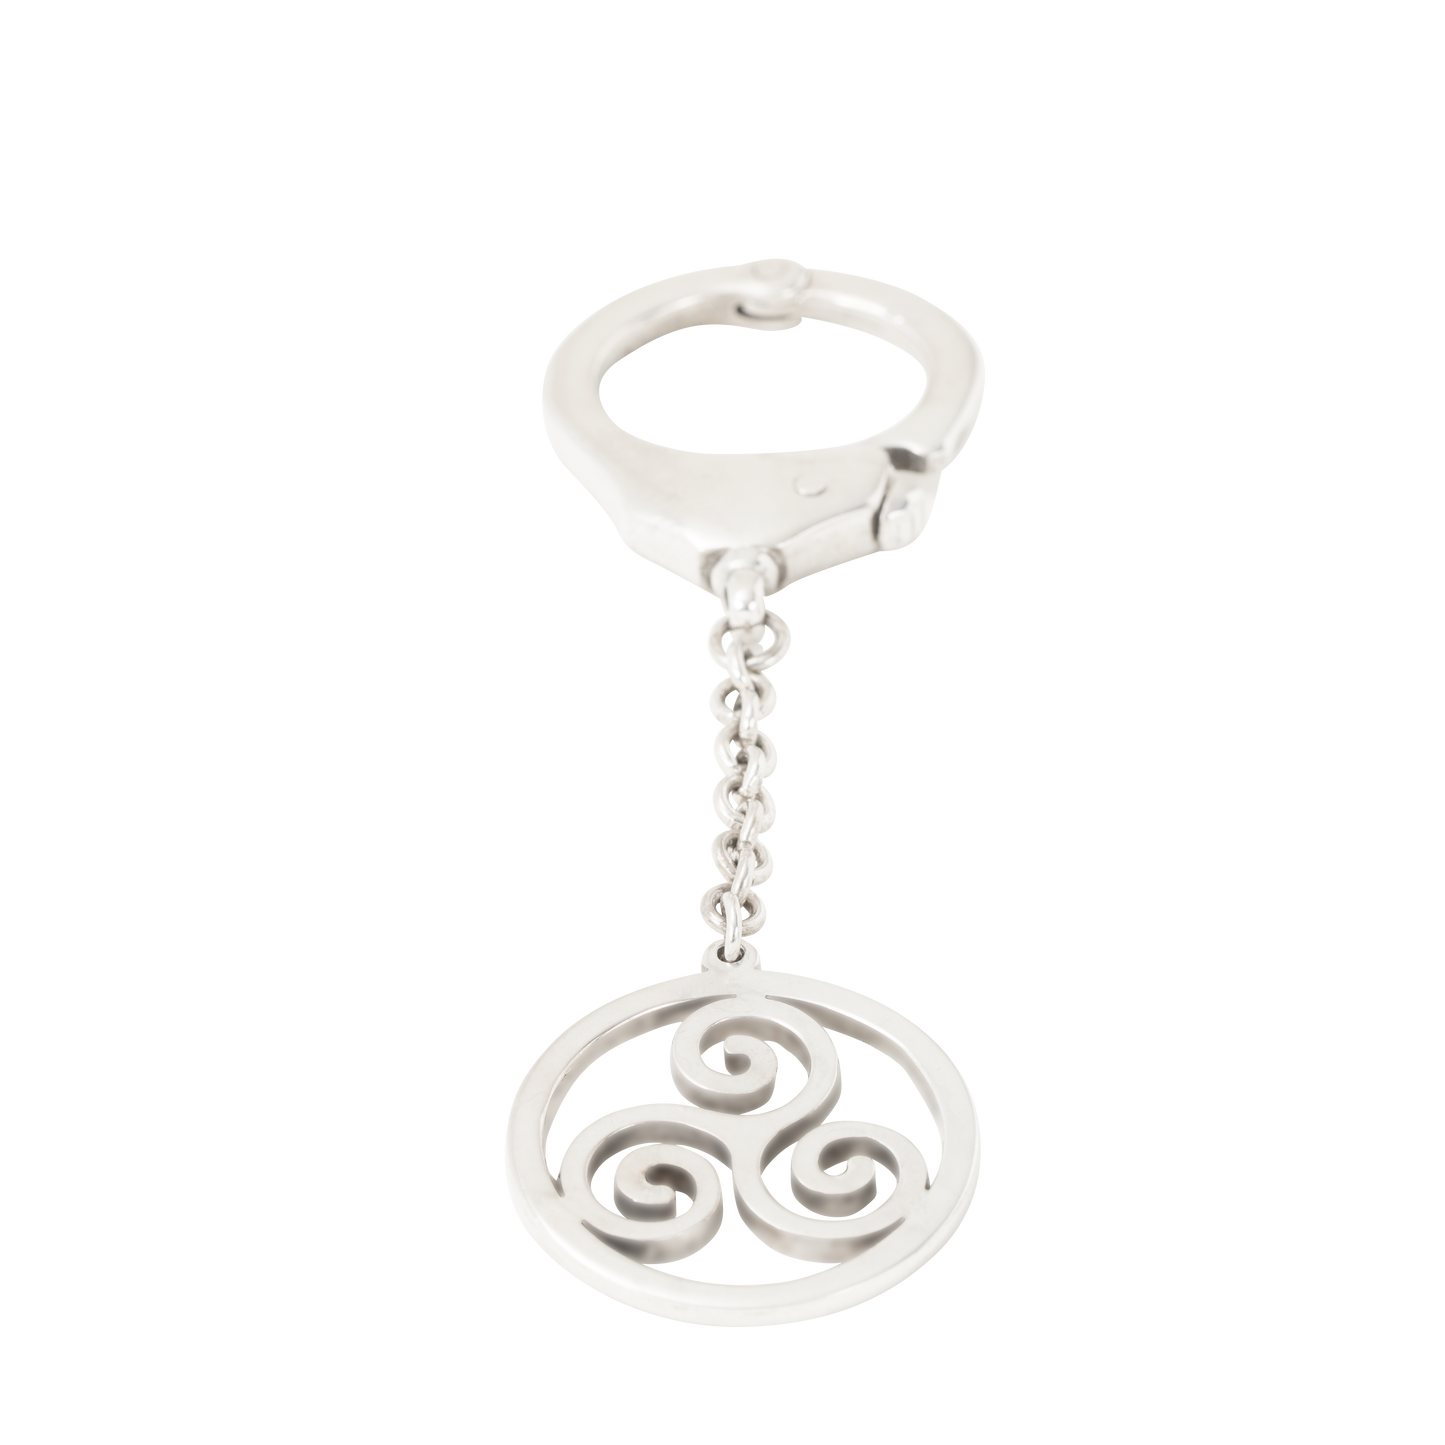 Keychain Triskele with Handcuff